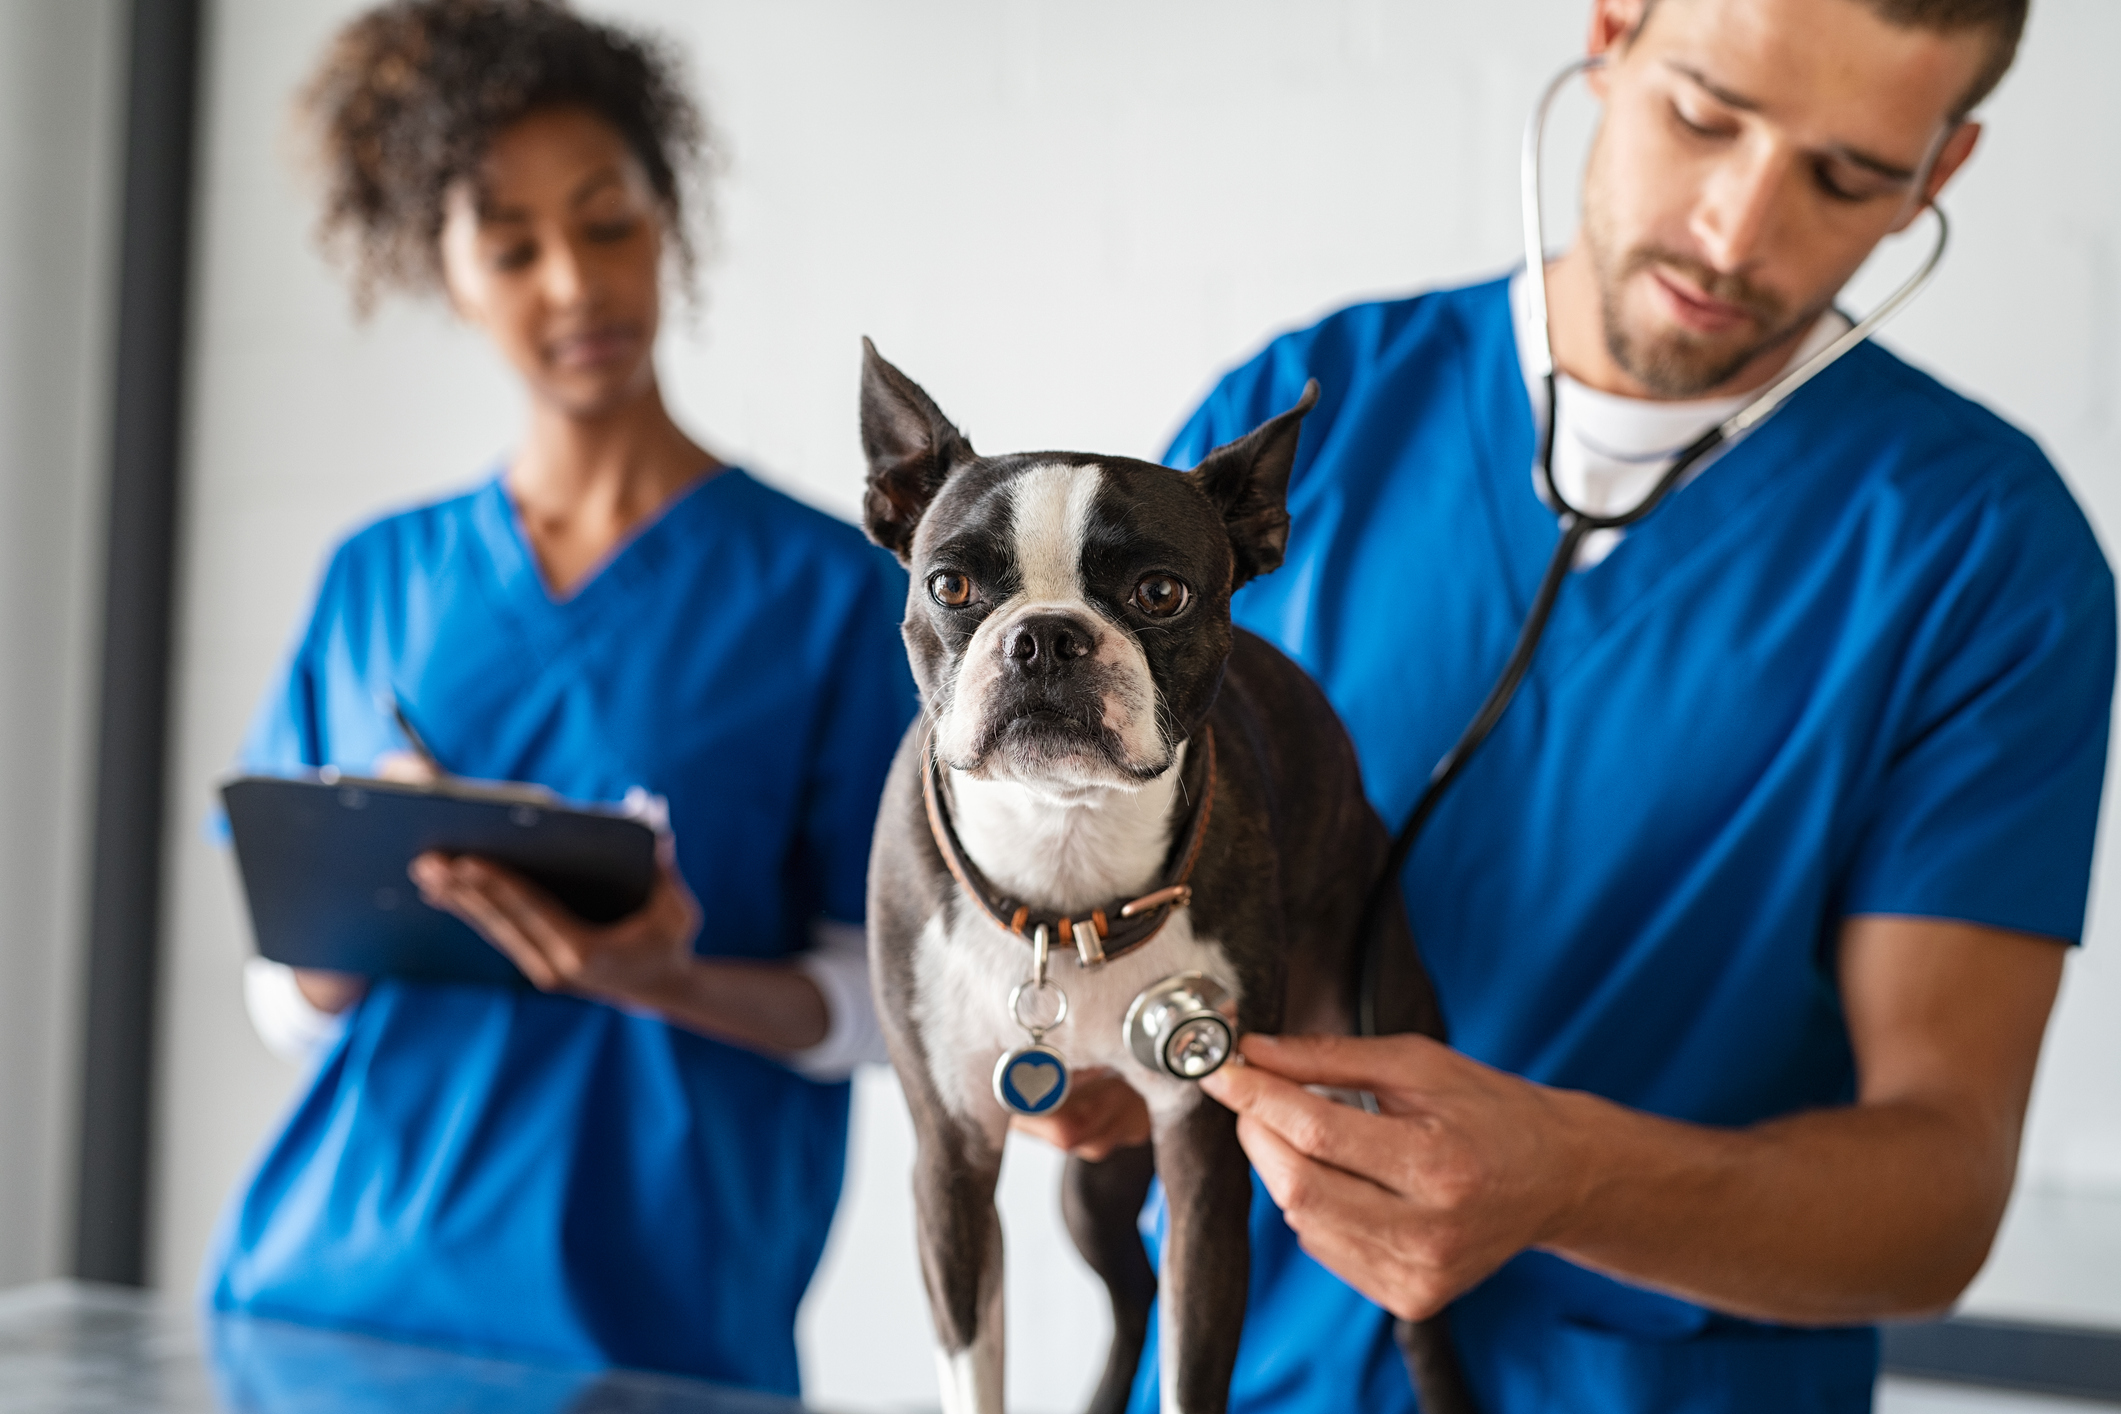 Resources for Veterinarians